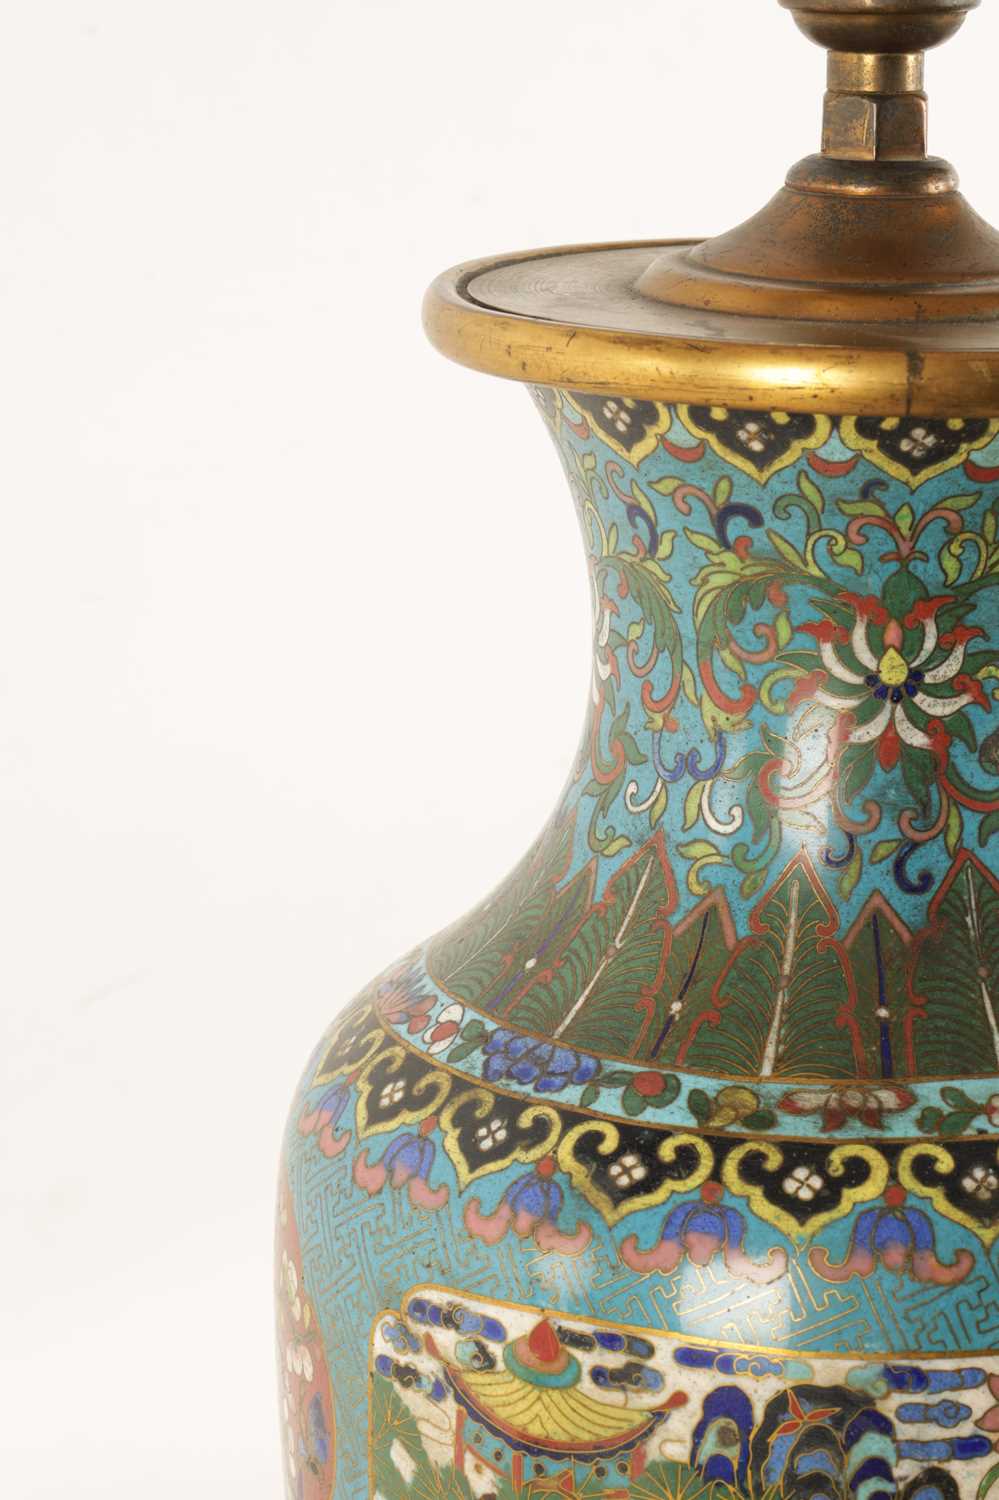 A LATE 19TH/EARLY 20TH CENTURY CENTURY CHINESE CLOISONNE VASE LAMP - Image 8 of 34